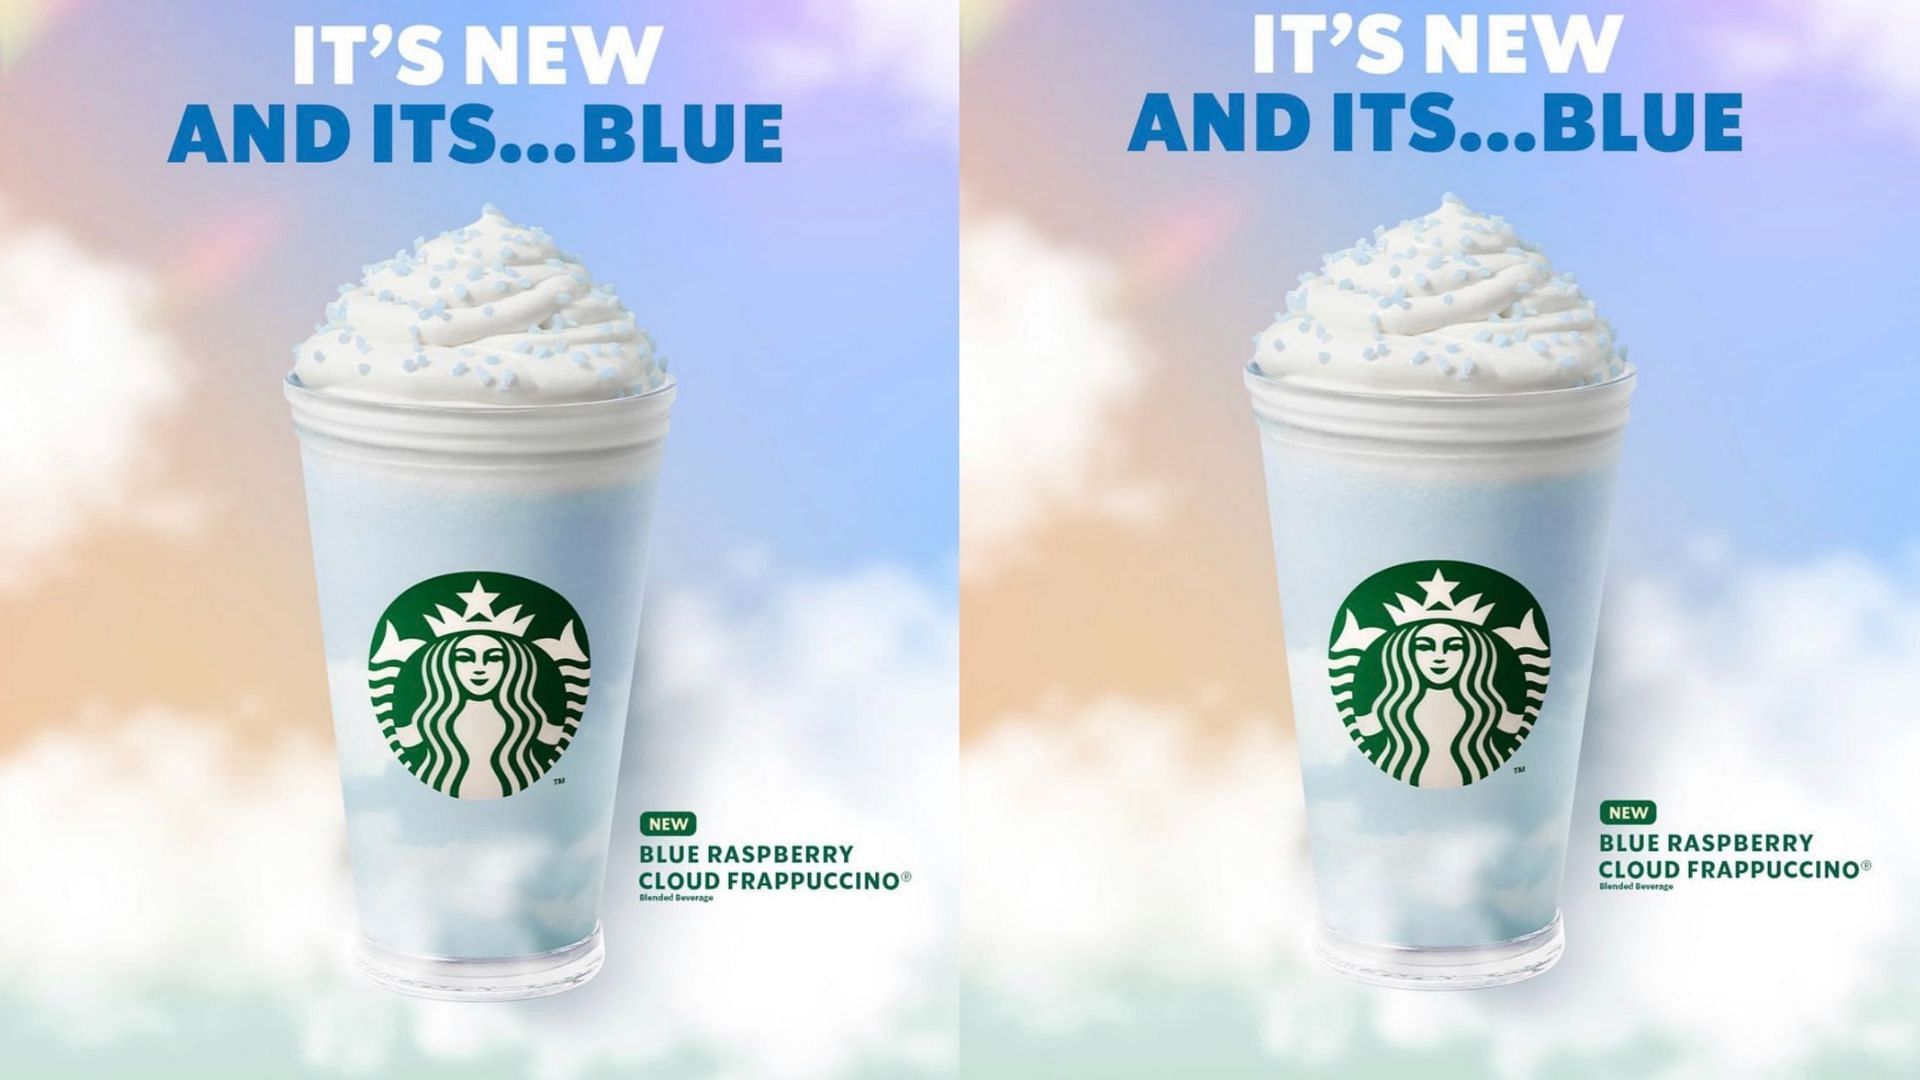 The new Blue Raspberry Cloud Frappuccino offers a refreshing and fruity drink that is high in blue raspberry candy flavor (Image via Stārbucks UK)